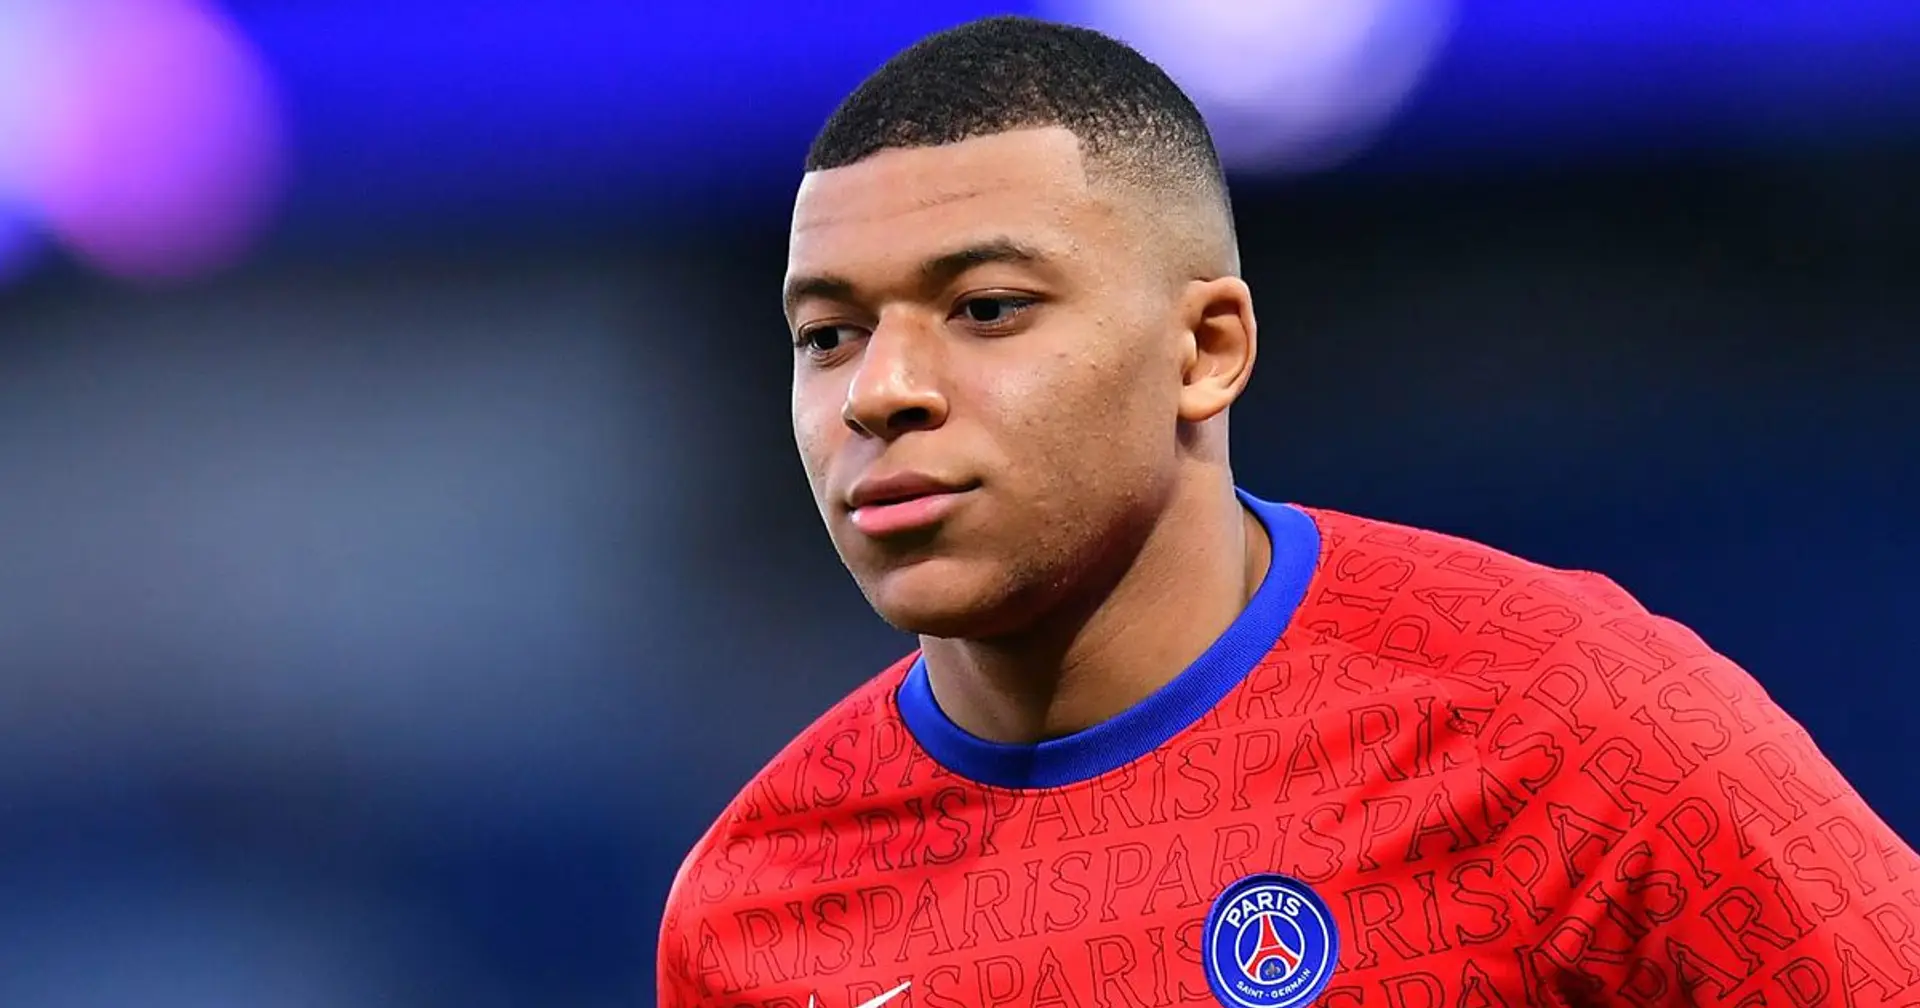 Date for Mbappe's pre-contract signing with Real Madrid revealed (reliability: 5 stars)